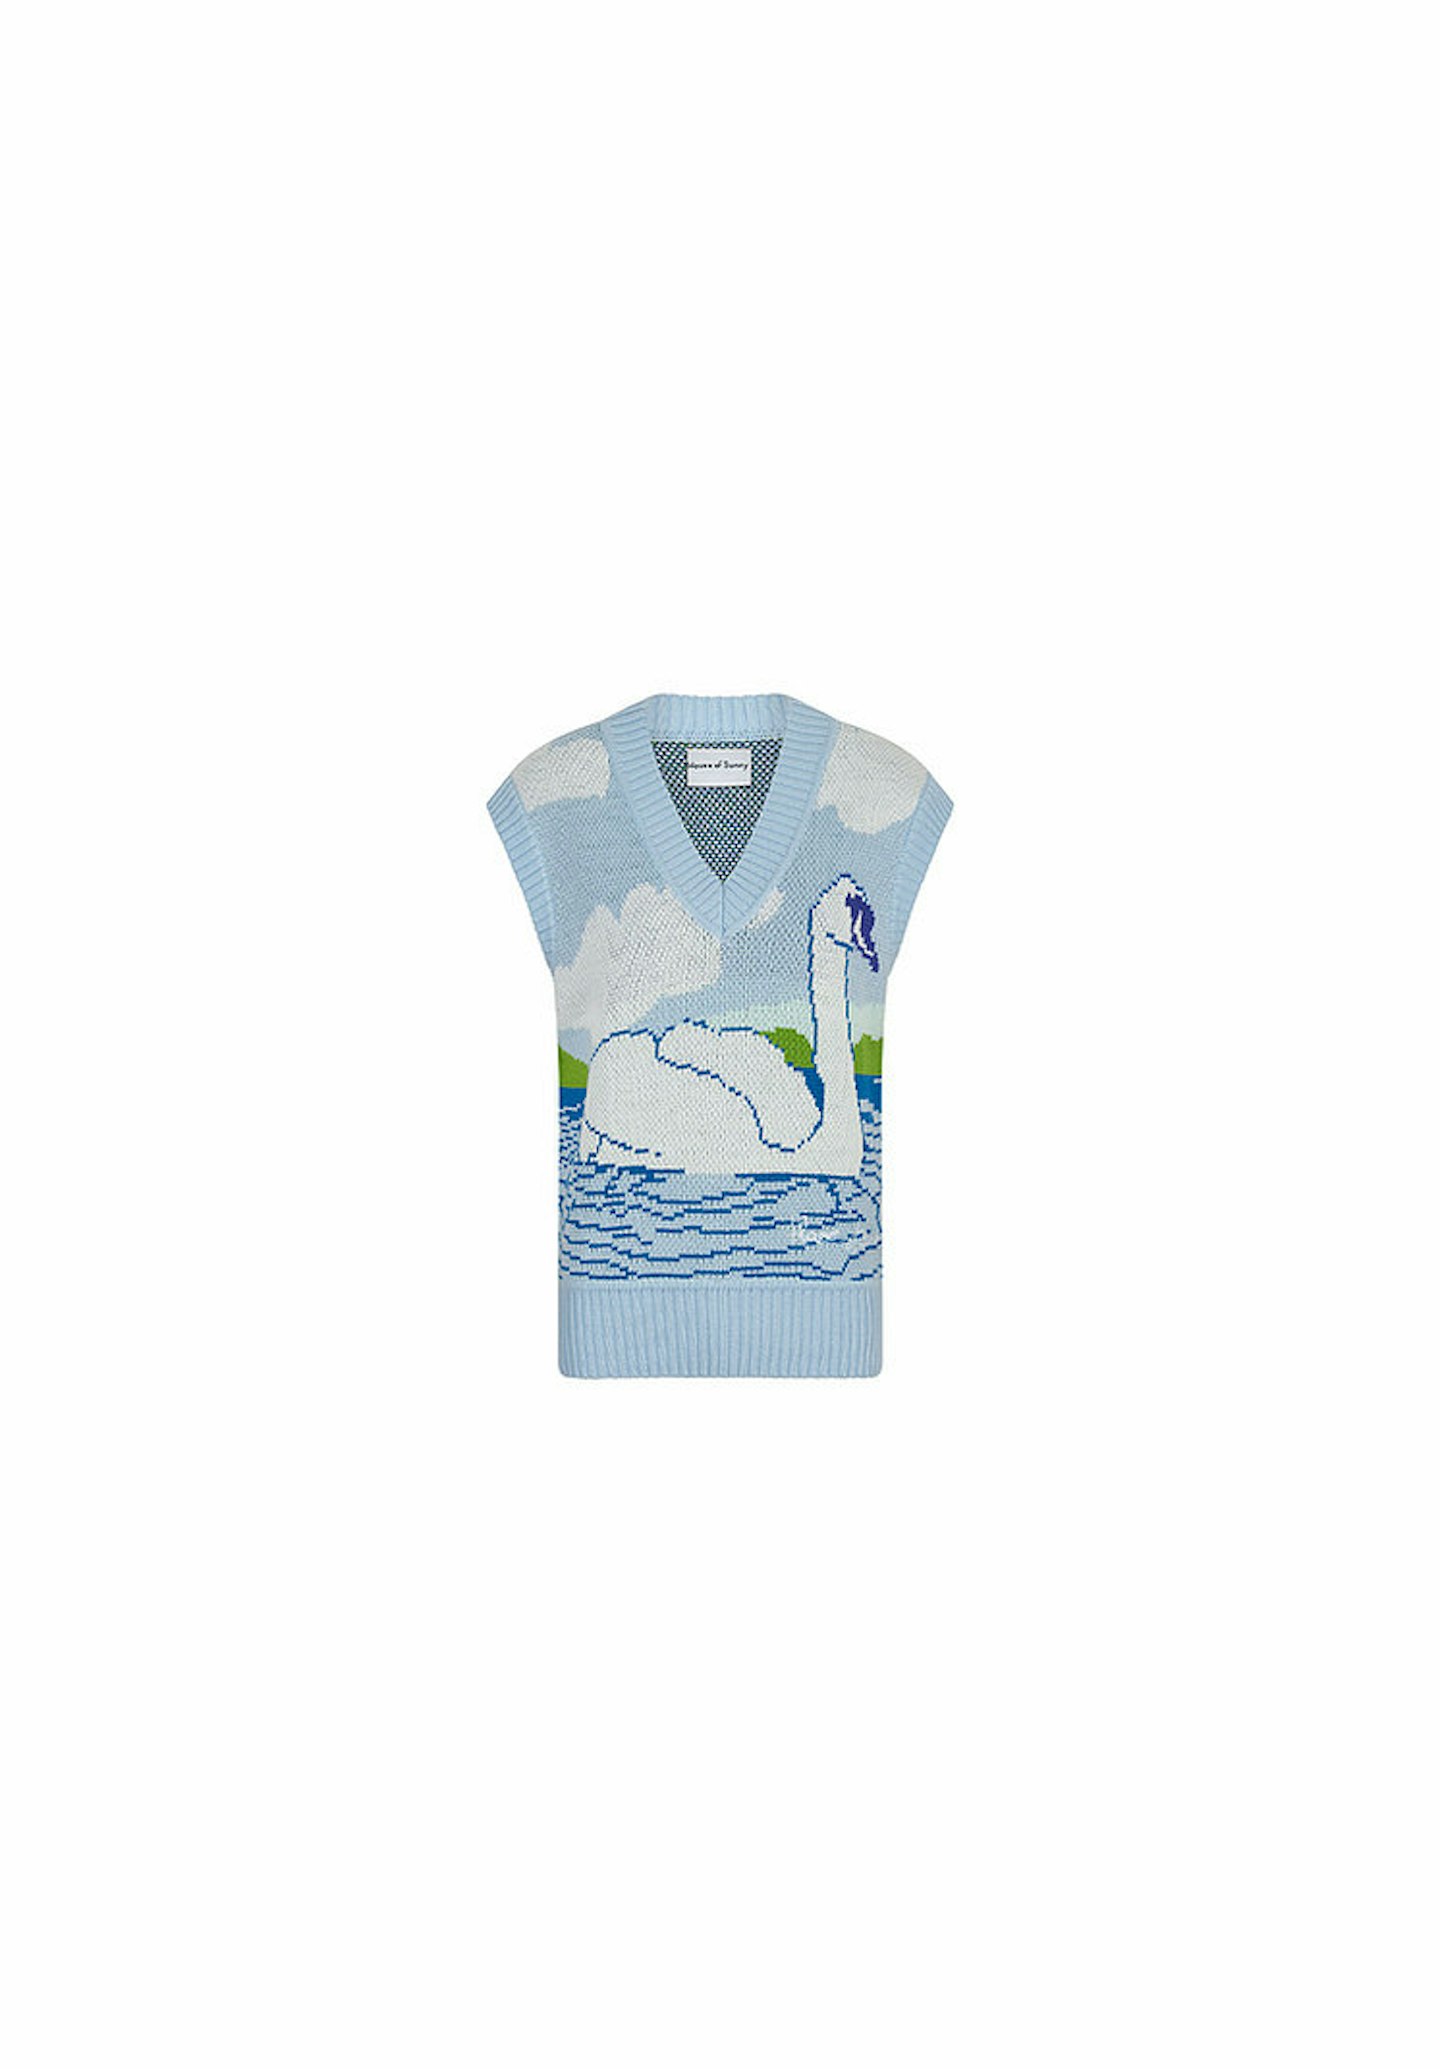 House of Sunny, Swan Sweater Vest, £69.60